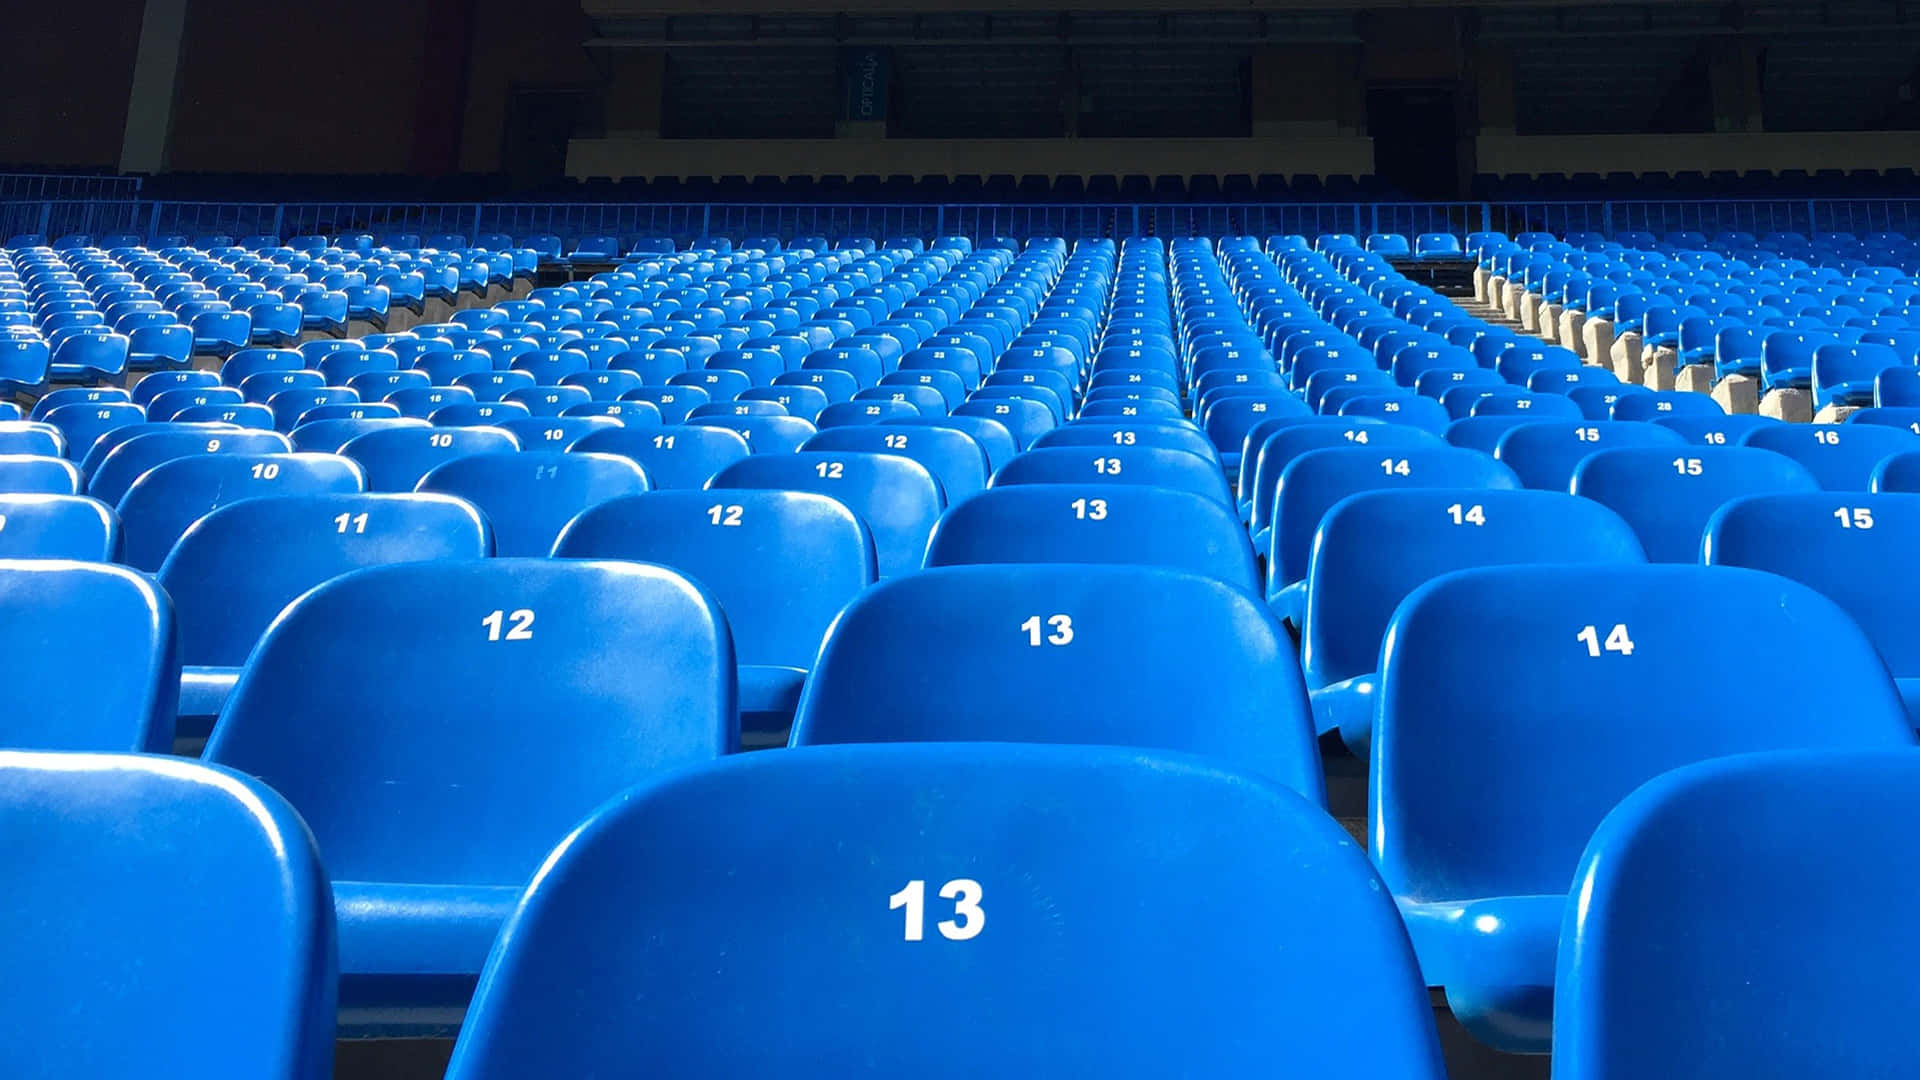 Blue Stadium Seats With Numbers